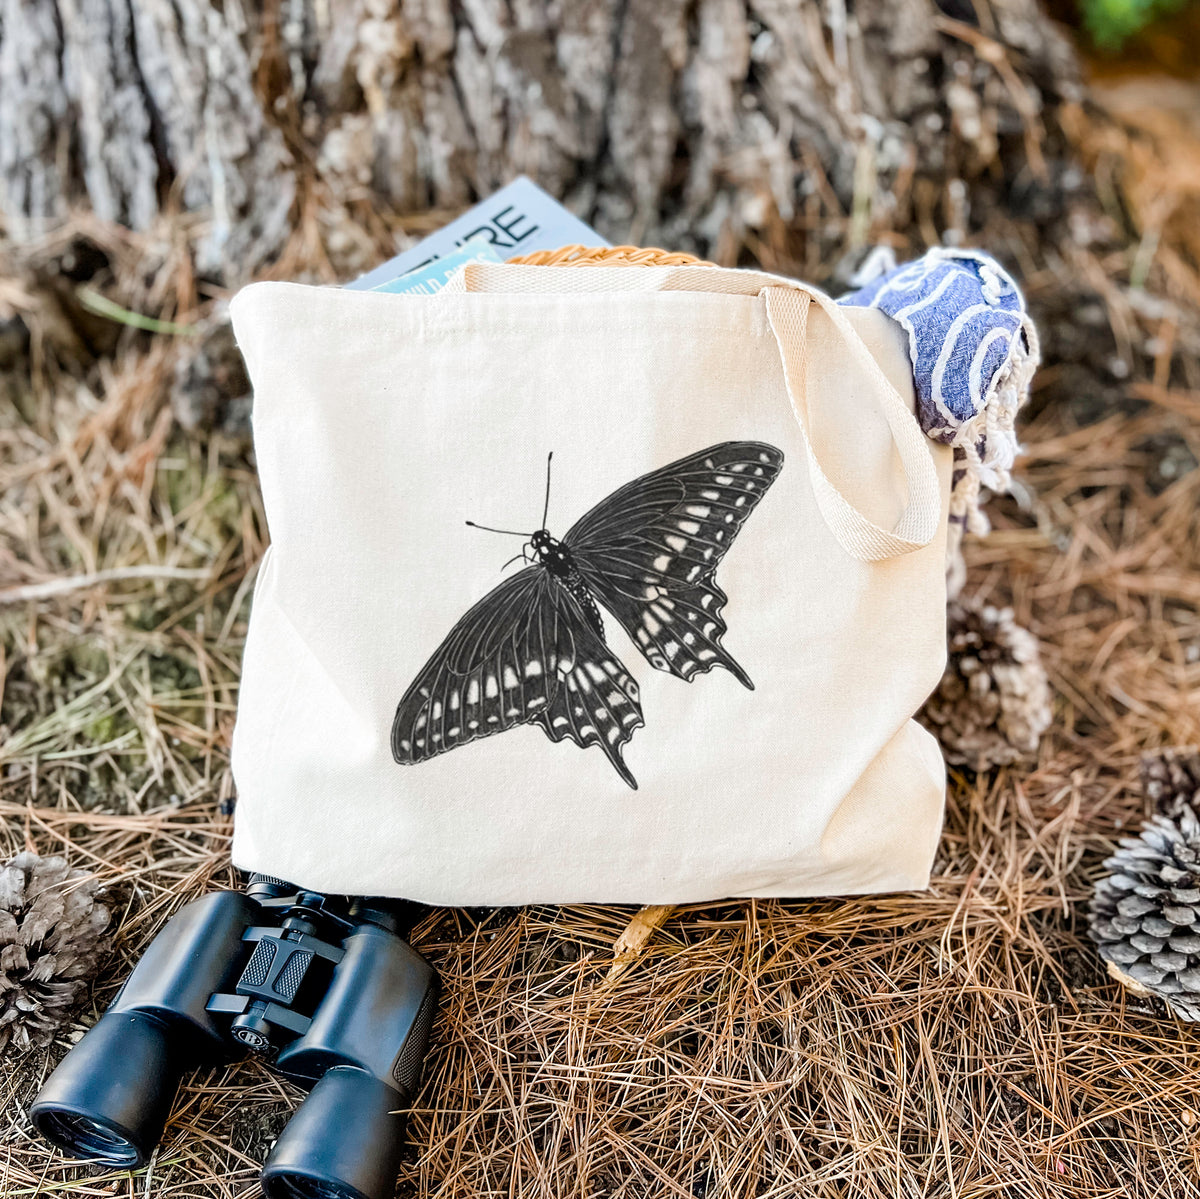 Black Swallowtail Butterfly - Papilio polyxenes - Tote Bag